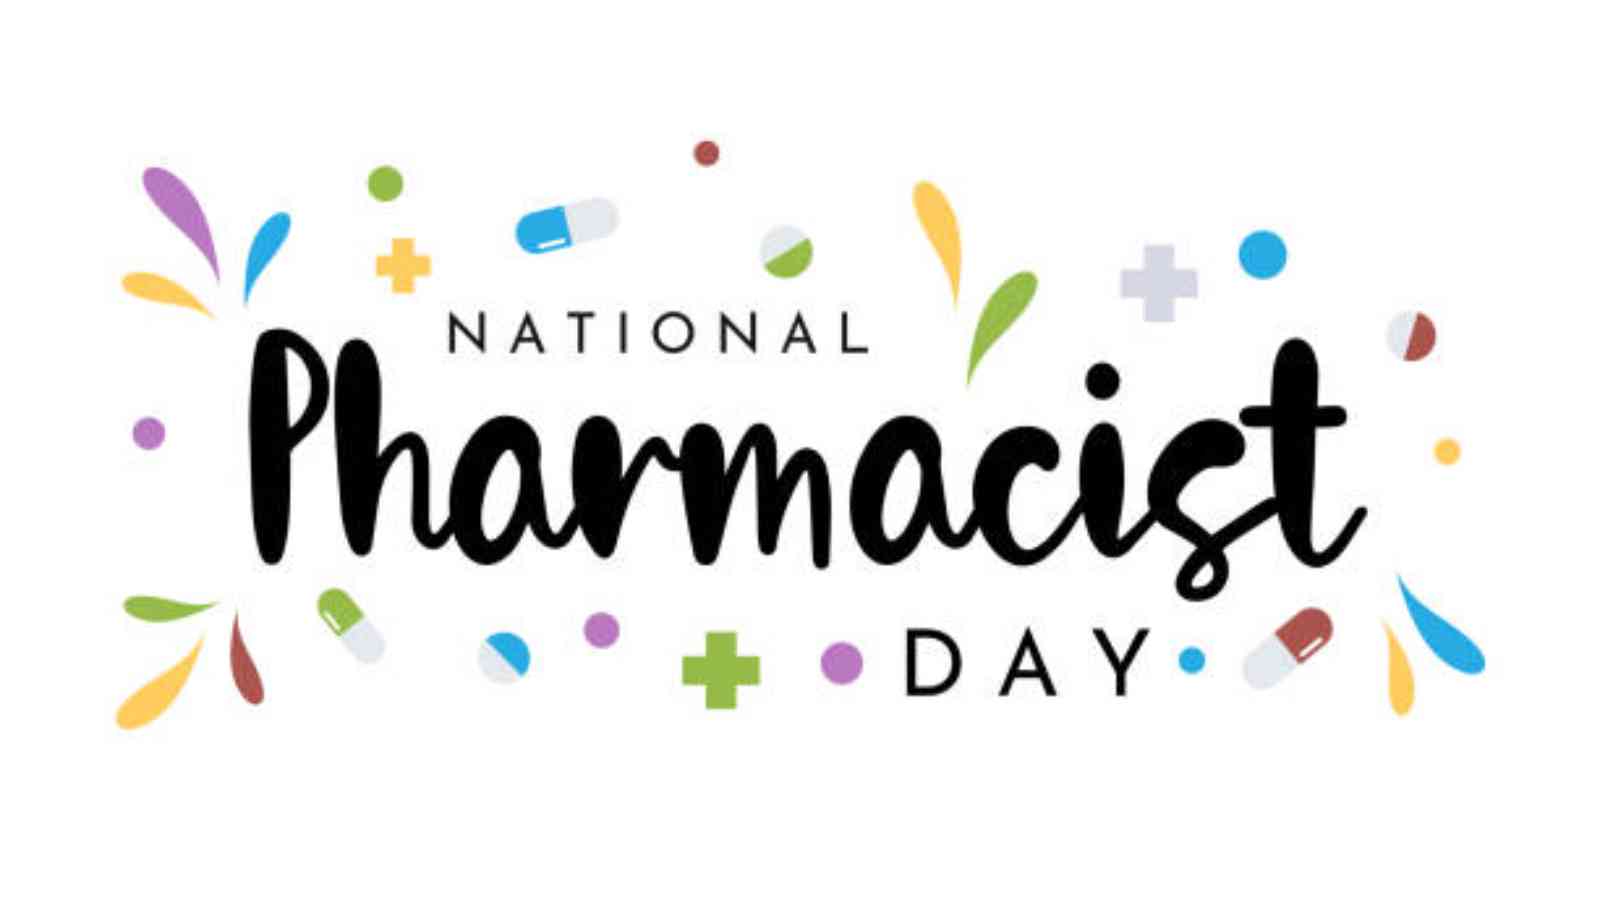 Happy National Pharmacist Day Wishes, Quotes and Slogans